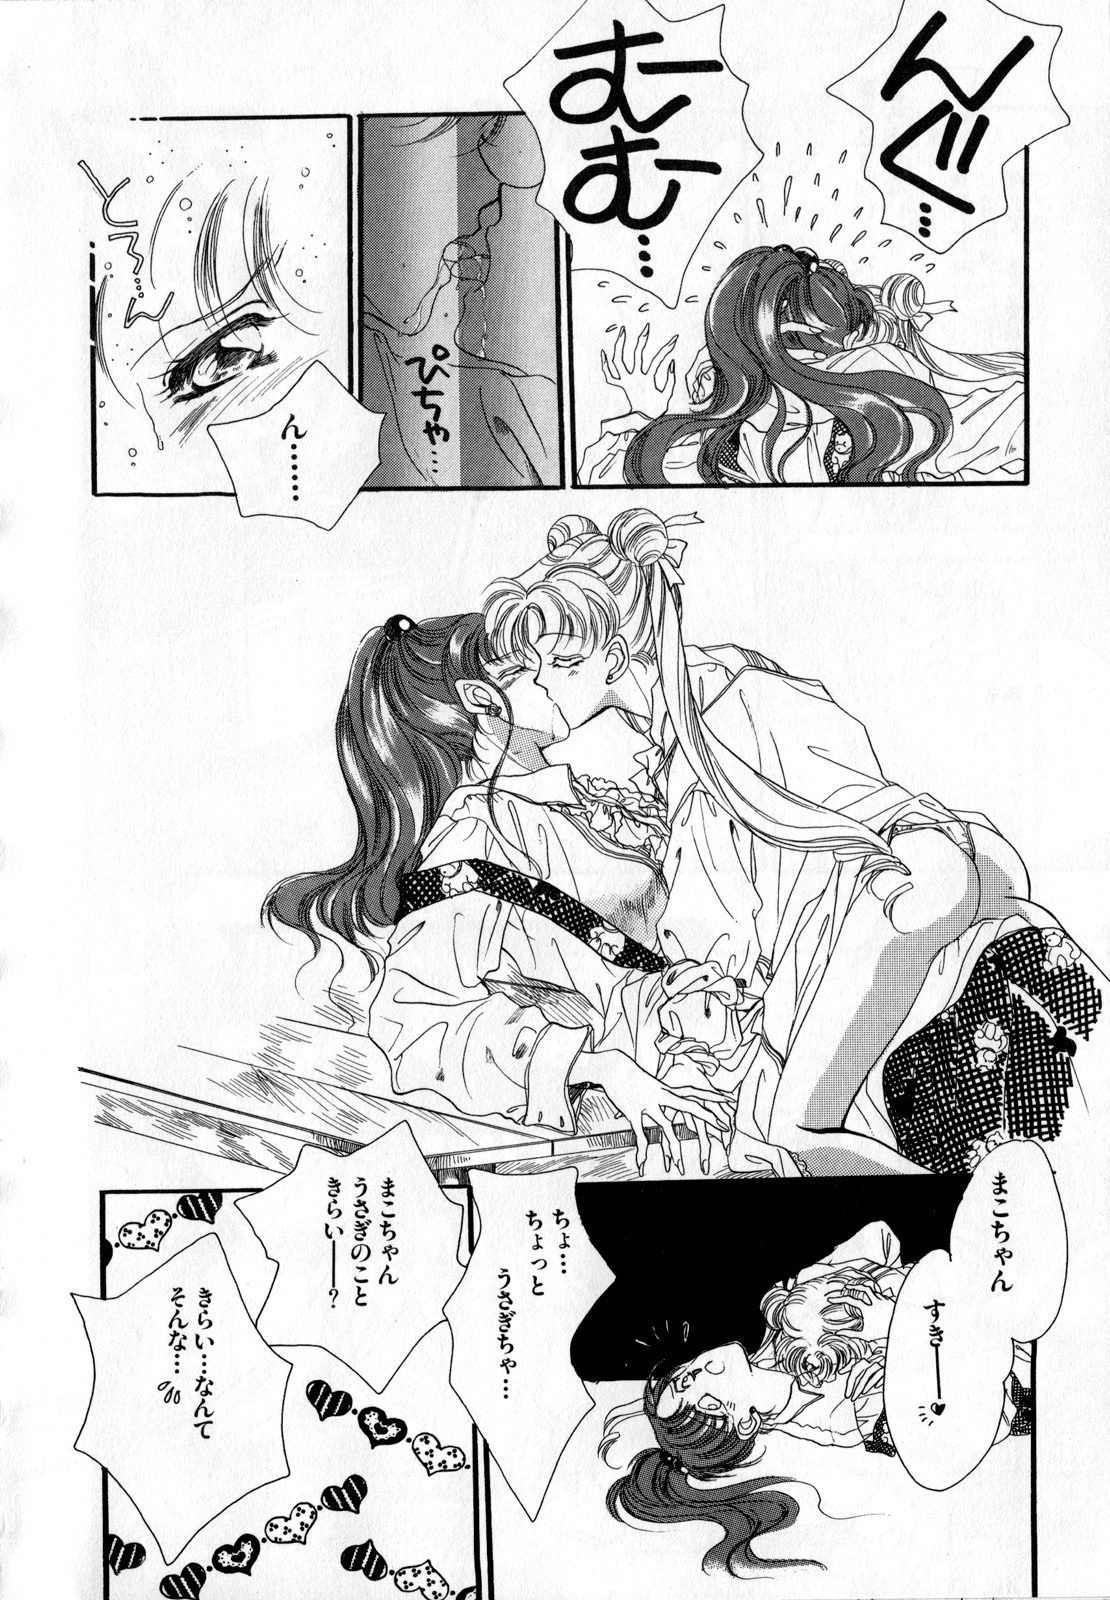 [Anthology] Lunatic Party 2 (Sailor Moon) page 7 full